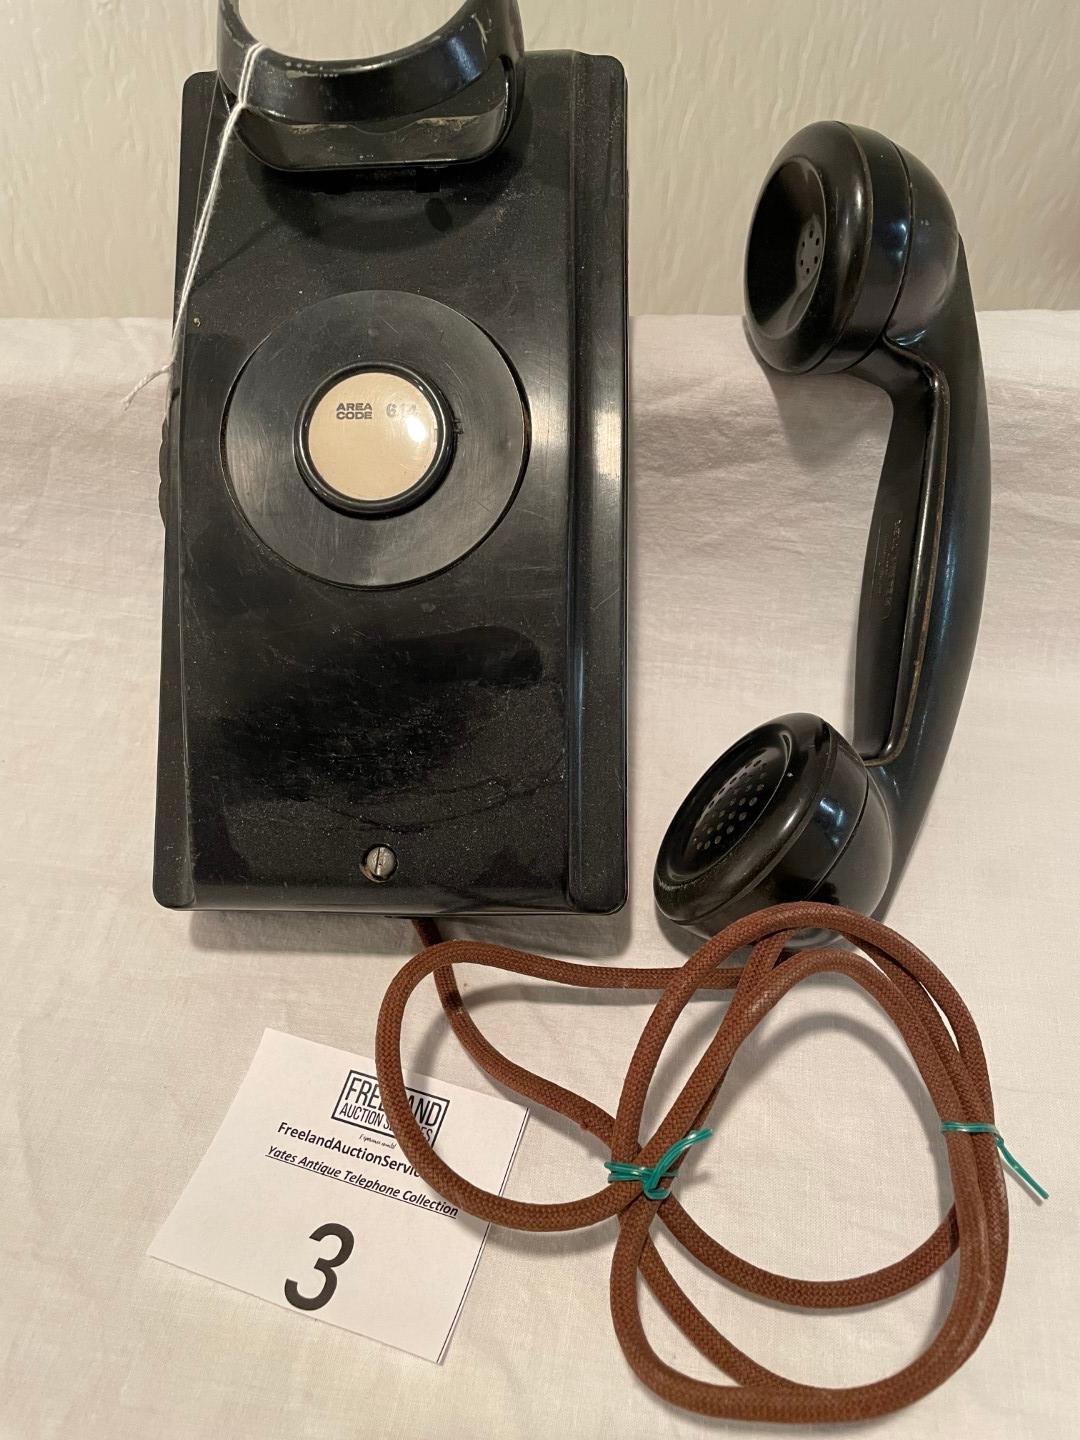 Western Electric non-dial wall telephone model 354-C thermoplastic